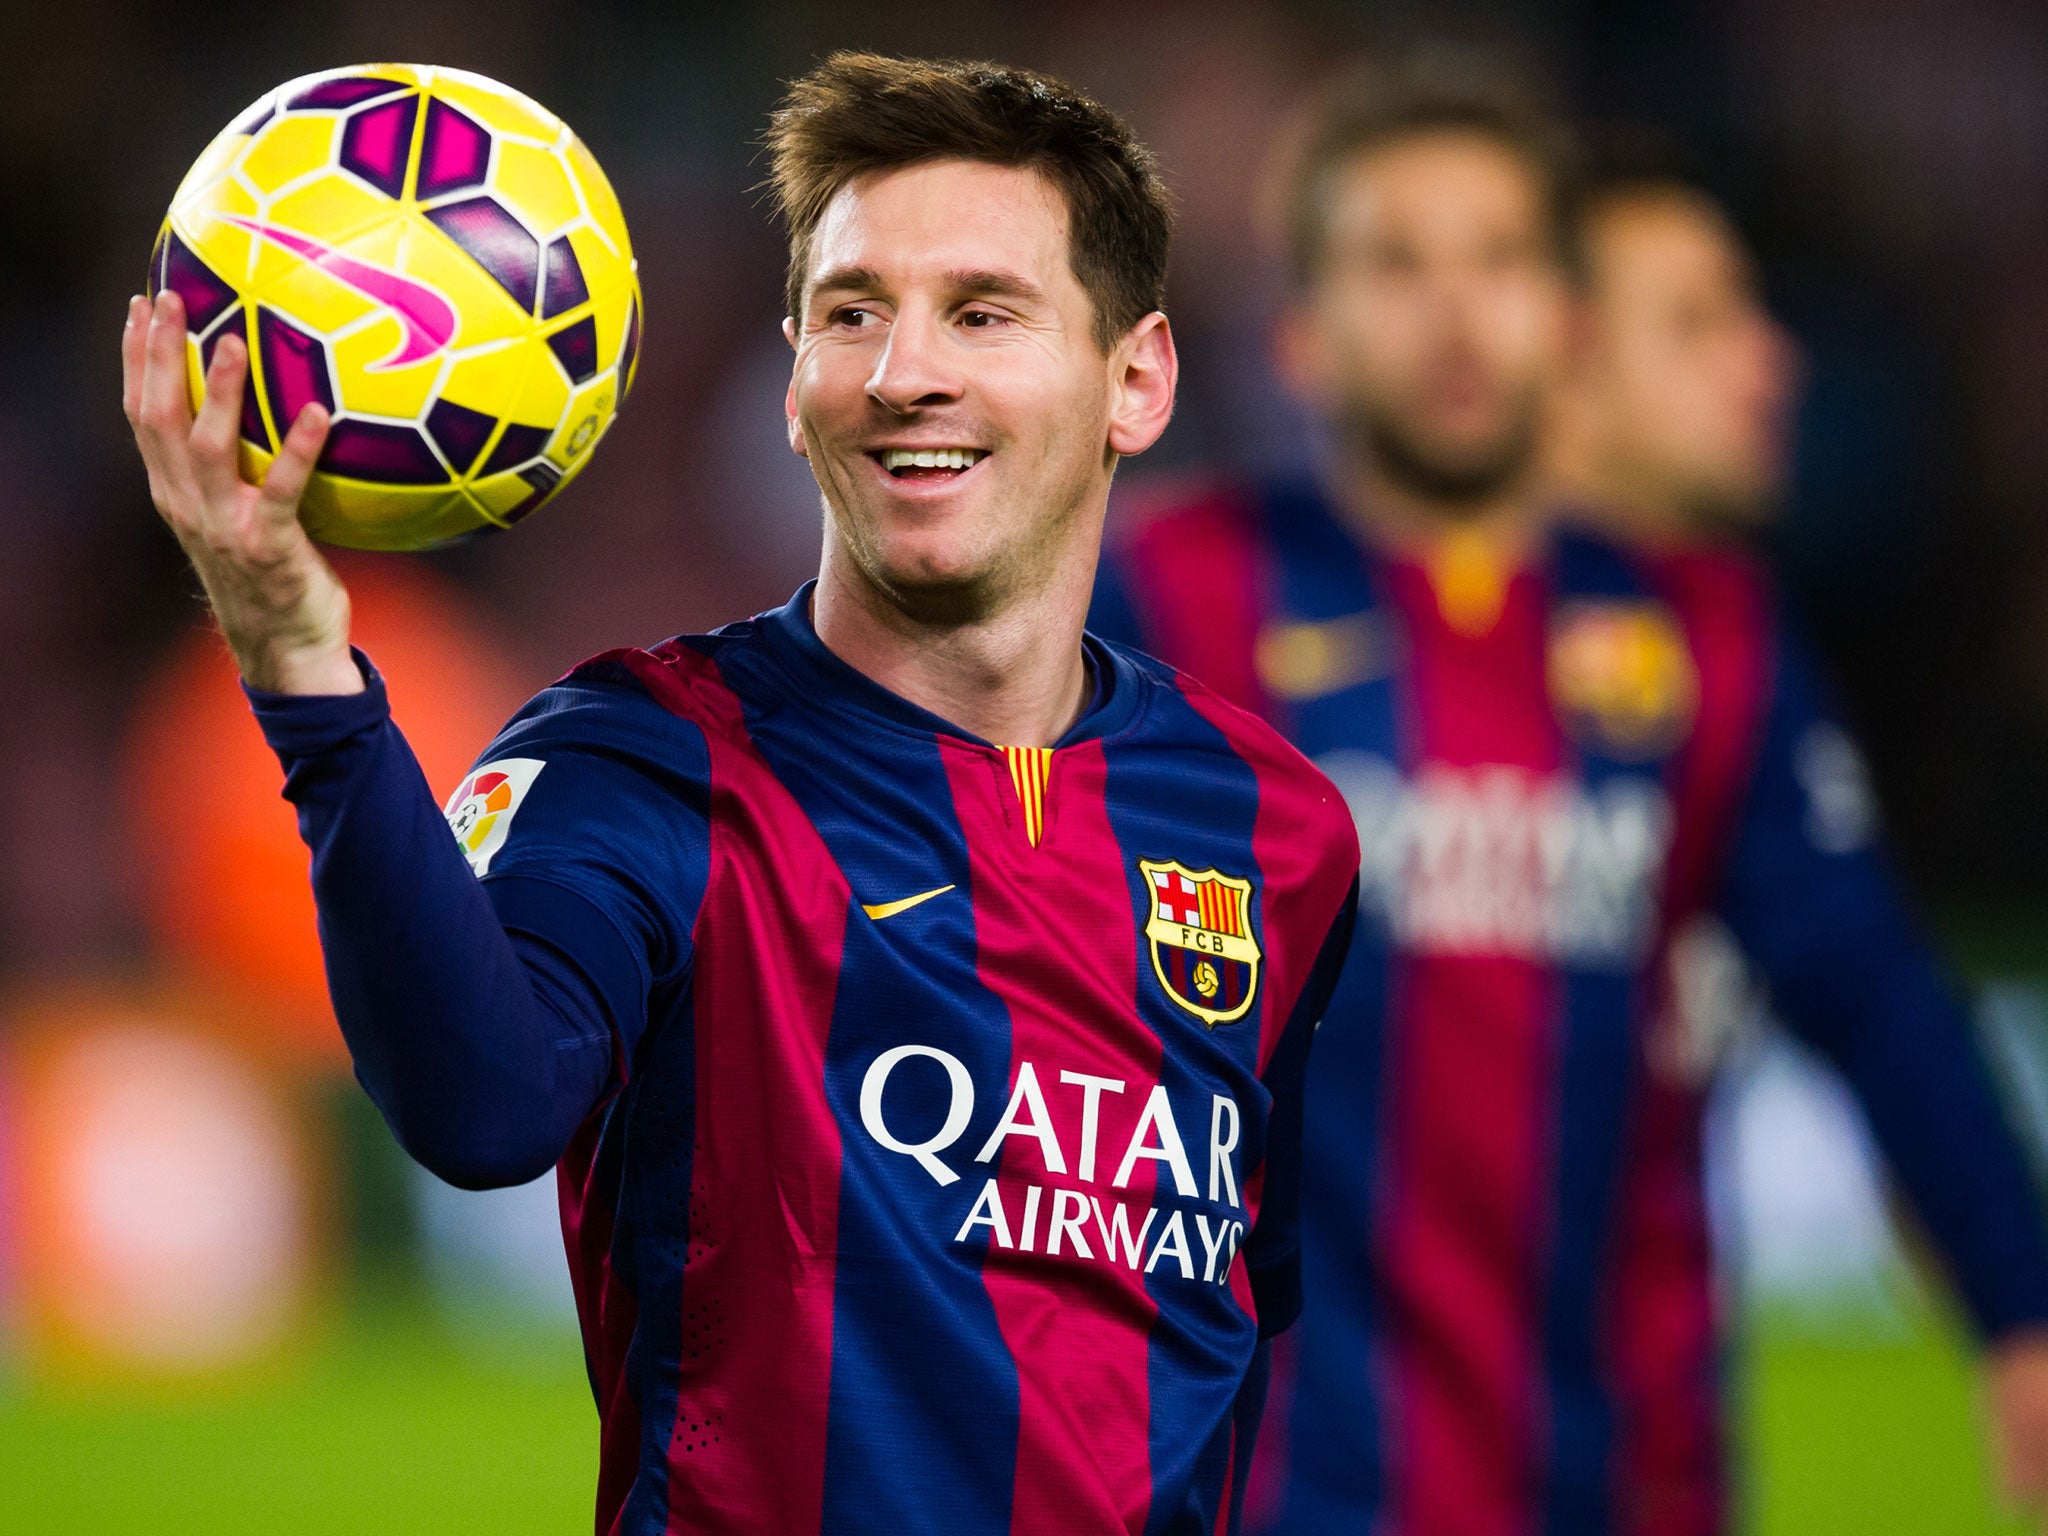 Lionel Messi had another record-breaking year